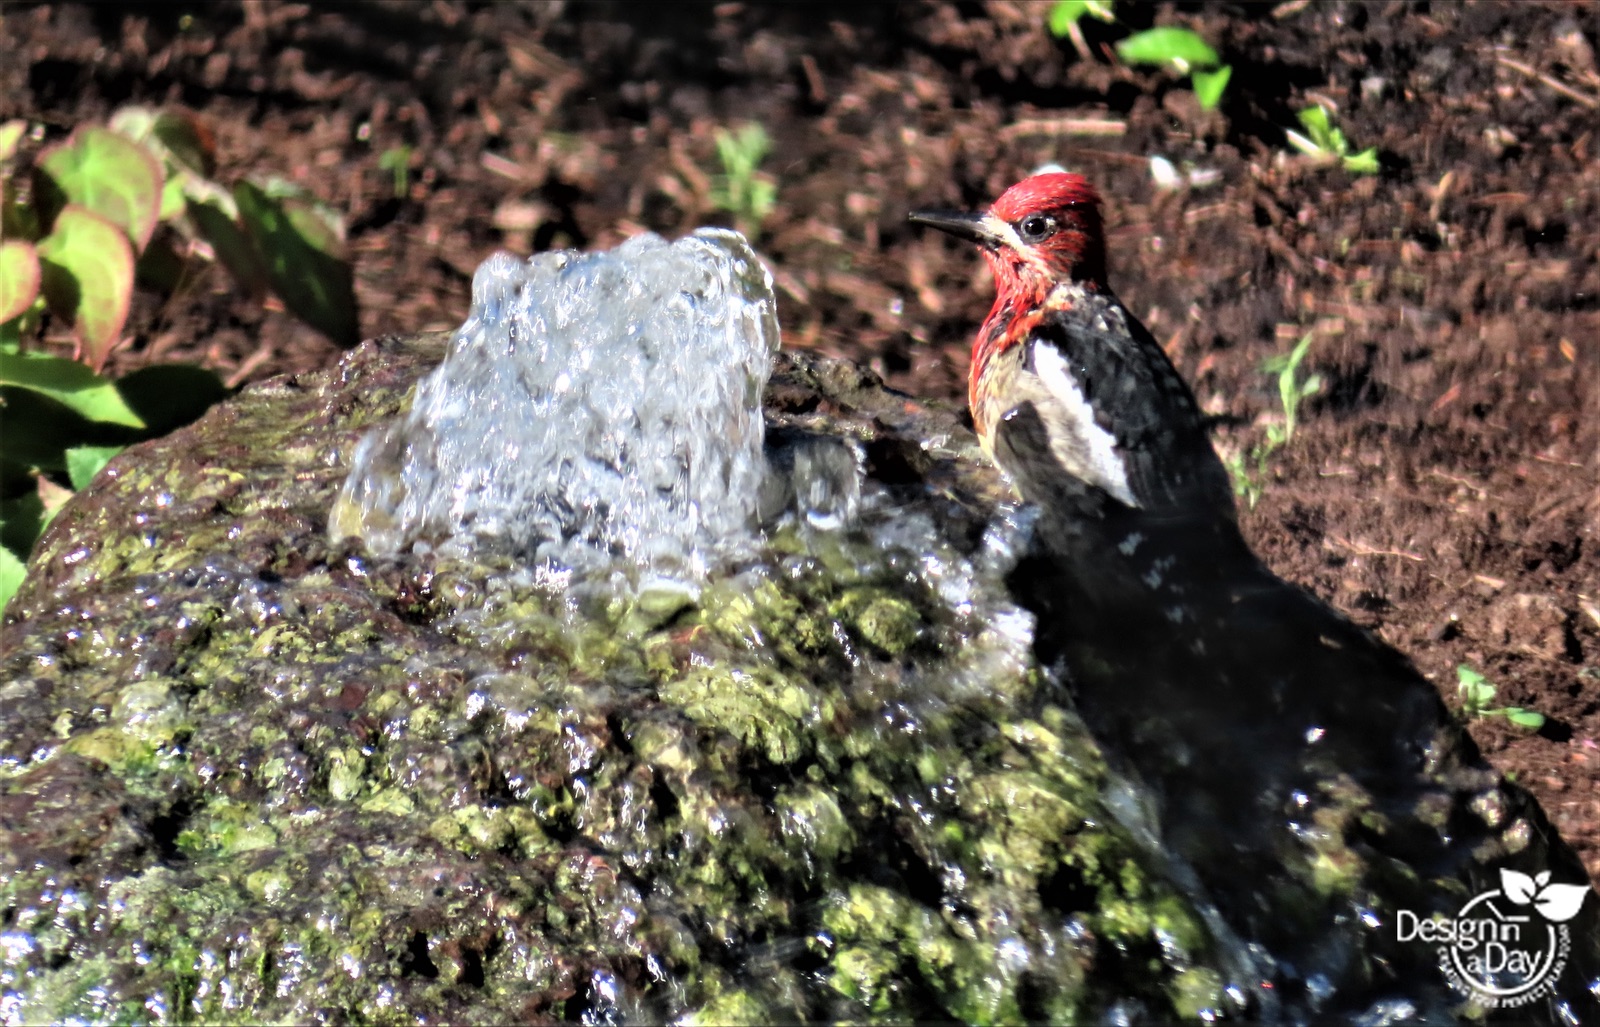 Gardening for birds requires a water source to attract wilidlife.